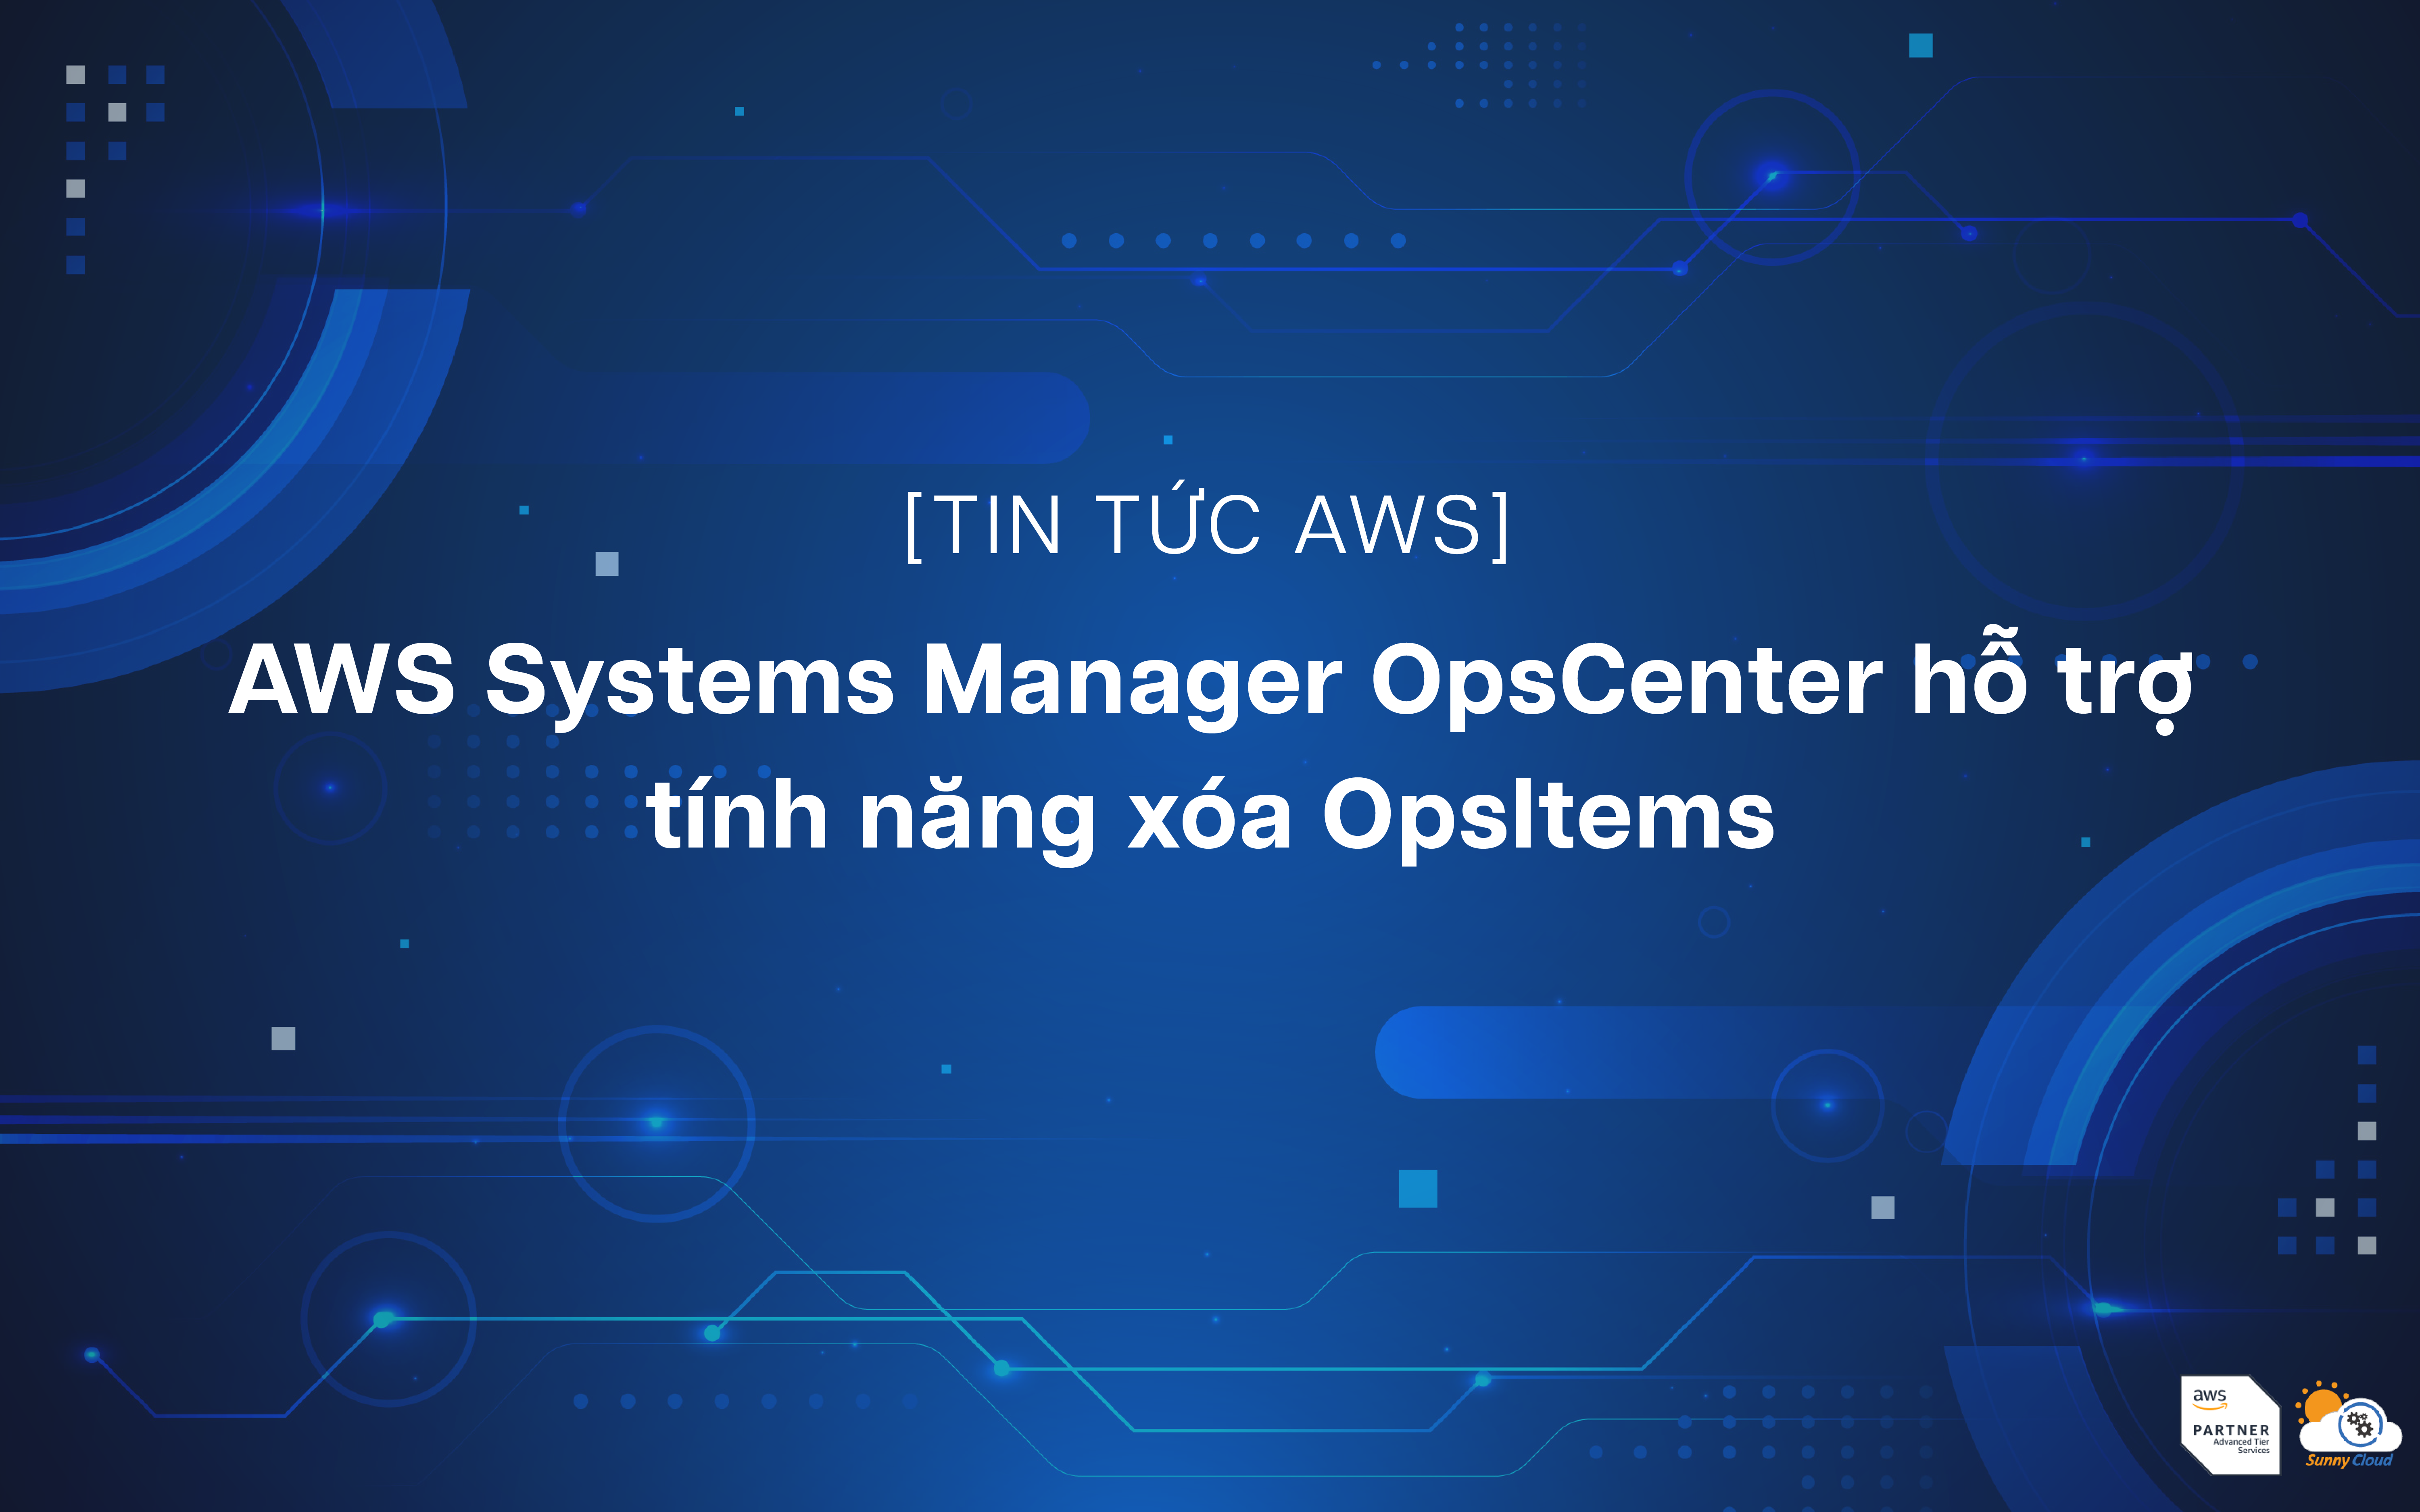 AWS Systems Manager OpsCenter hỗ trợ tính năng xóa OpsItems